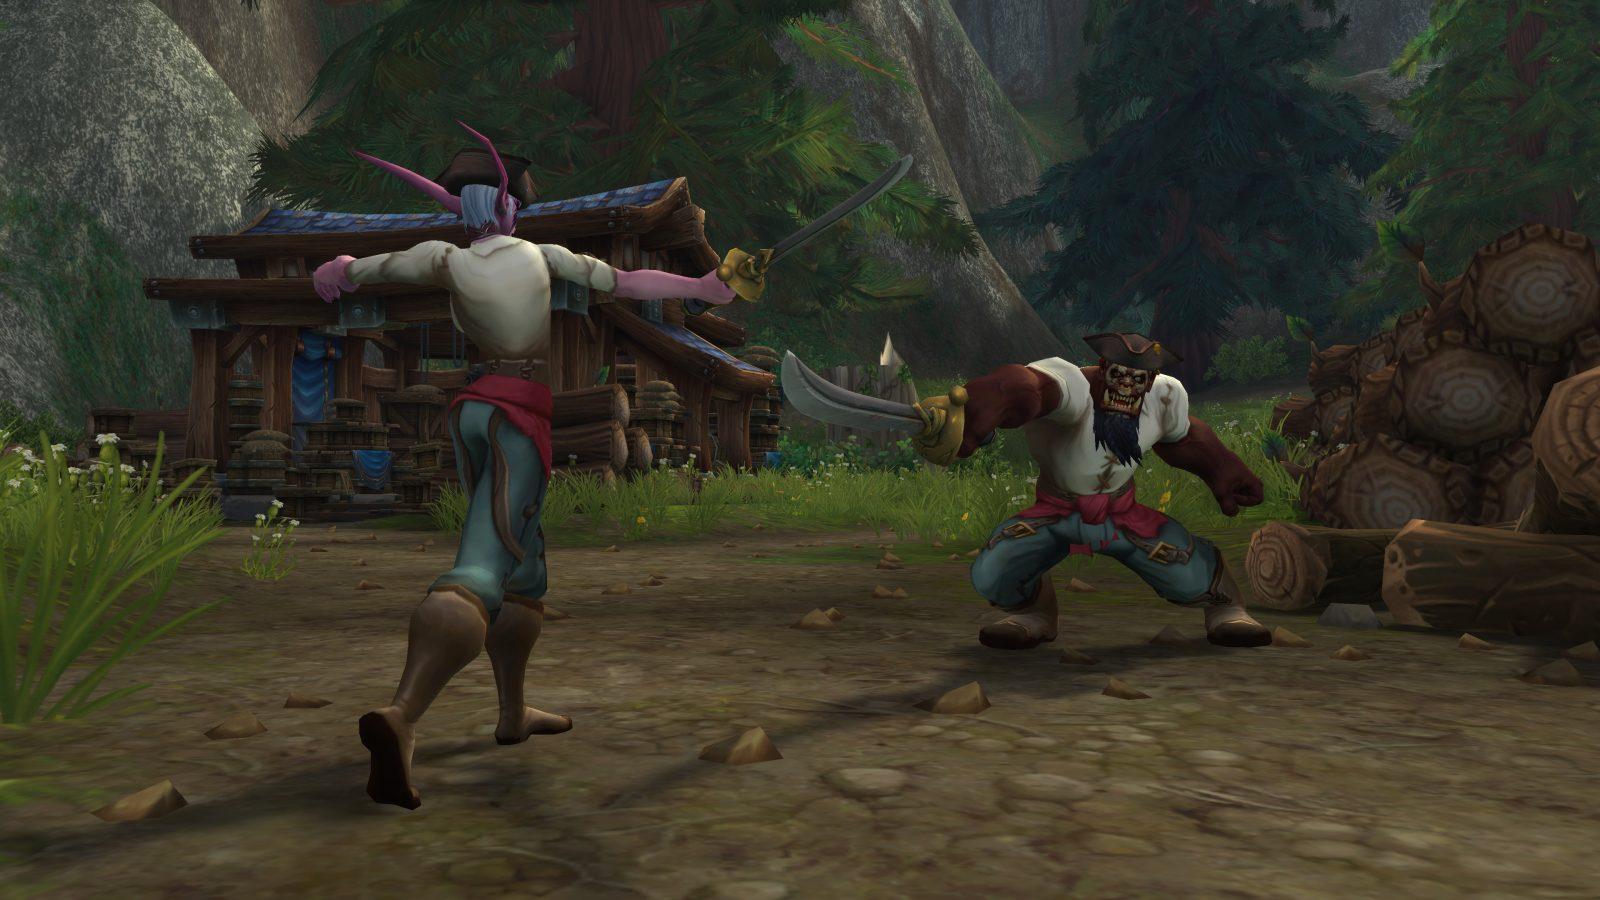 Two pirates stand and fight in WoW Plunderstorm